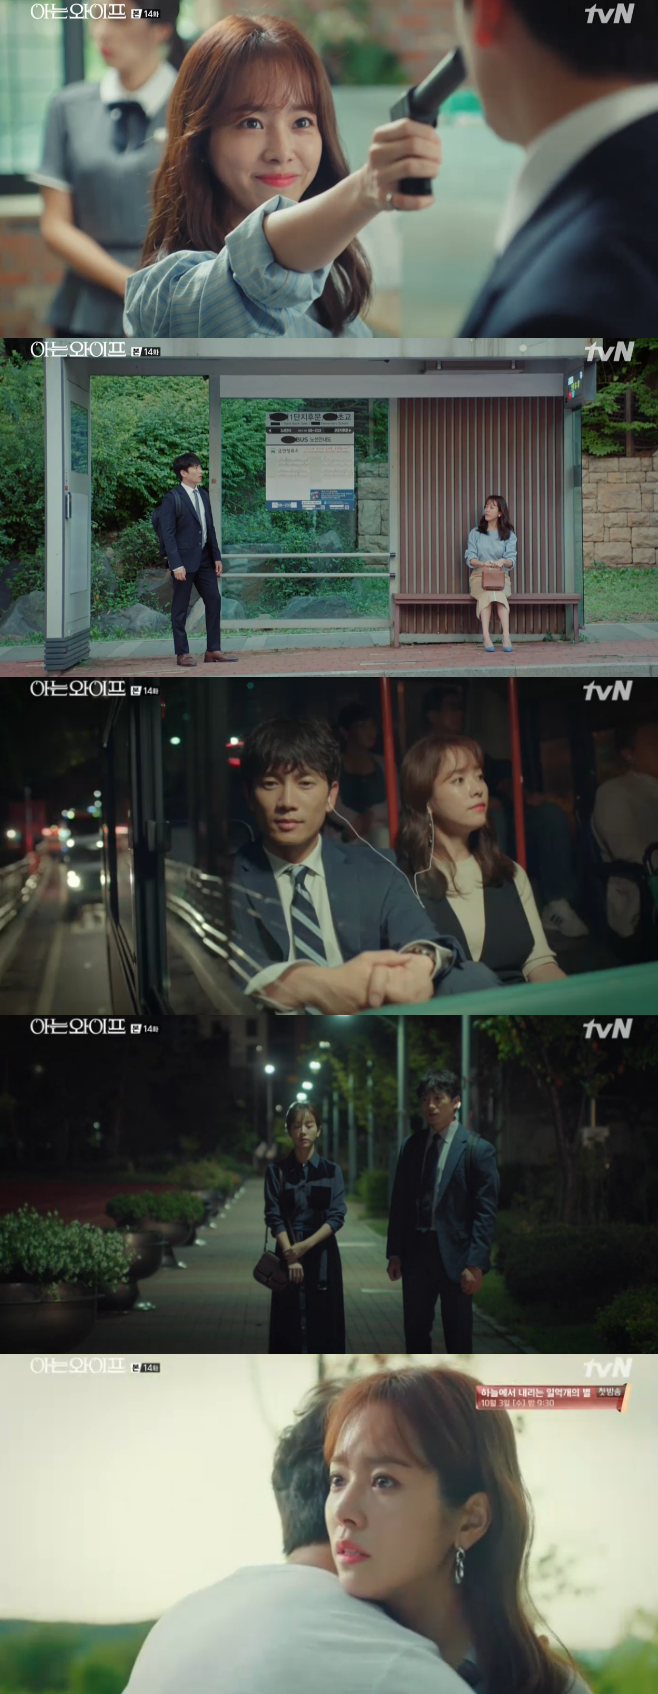 The fate of the knowing wife was irresistible: Ji Sung and Han Ji-min eventually turned around and began to love again.In the TVN drama Knowing Wife, which was broadcast on the afternoon of the 13th, Cha Ju-hyuk (Ji Sung) was shown confessing to Seo Woo Jin (Han Ji-min).On that day, Seo Woo Jin continued to straight as previously declared; Cha Ju-hyuk told him, You shouldnt meet me.I can not be happy, he continued, but Seo Woo Jin continued to actively dash, saying, What will my mind do to the deputy? Cha Ju-hyuk, who was forced to lunch together without stopping Seo Woo Jin who kept following him, sent Seo Woo Jin first and left the restaurant alone.Then Lee Hee-won (Ganghanna Boone) appeared.Lee Hee-won, as he did before the change, told Cha Ju-hyuk, I used to like you before. But this time Cha Ju-hyuk was different.You did, I didnt have much eyes on men, he said, and then left first, leaving a greeting saying, Im happy, dont let go of the cello.Seo Woo Jin made a public declaration in front of the employees, I have a heart for the car deputy while Cha Ju-hyuk was not in the company.When Cha Bong-hee (Son Jong-hak) said, We will push you, all the employees praised the trivial things as they really fit together.Cha Ju-hyuk, who was patient as this atmosphere continued until the dinner party, made everyone feel sorry for please stop.The most hurt was Seo Woo Jin, who told Cha Ju-hyuk: I thought I could try.I just knew that my mind could hurt me, he said. Ill ask you the last time, is it not real? But Cha Ju-hyuks choice was NO again.Eventually, Seo Woo Jin turned around saying, Ill give up, lets live our lives.The two continued their awkward relationship; Seo Woo Jin avoided Cha Ju-hyuk, only dealing with him clerically.The day Cha Ju-hyuk passed Seo Woo Jin waiting for a bus on the side of the road. Cha Ju-hyuk suddenly came up with the news that a bus with Seo Woo Jin was in an accident 10 minutes later.Before the change, I remembered that the road was stagnated in the same time bus accident.Cha Ju-hyuk, who felt that the bus of Seo Woo Jin would be in an accident, told Yun Jong-hoo (Jang Seung-jo), who was driving, Get off for a while because you are in a hurry.The large Mitsubishi Fuso Truck and Bus Corporation behind the bus is driving close.He blocked the Mitsubishi Fuso Truck and Bus Corporation and stopped the accident.Seeing Cha Ju-hyuk in the drivers seat, Sea Woo Jin got off the bus.Realizing that he cant resist love, Cha Ju-hyuk said: I know he doesnt know, I know he doesnt know, I dont know anything like conscience.One thing Im sure is that I love you so much. After saying, I hugged Seo Woo Jin warmly.The bond between the two turned around and continued again.Cha Ju-hyuk, who had already lived a life that hurt Seo Woo Jin, pushed the upcoming Seo Woo Jin, but could not prevent the set fate.So is the ending waiting for the two, like Cha Ju-hyuks previous life, a bad ending? More likely not.Cha Ju-hyuk, who thought his wife had changed, realized his lack between the future and the past.Not to mention the mind of Seo Woo Jin, who knew all the words and went straight to Cha Ju-hyuk.Photo TVN Broadcast Screen Capture